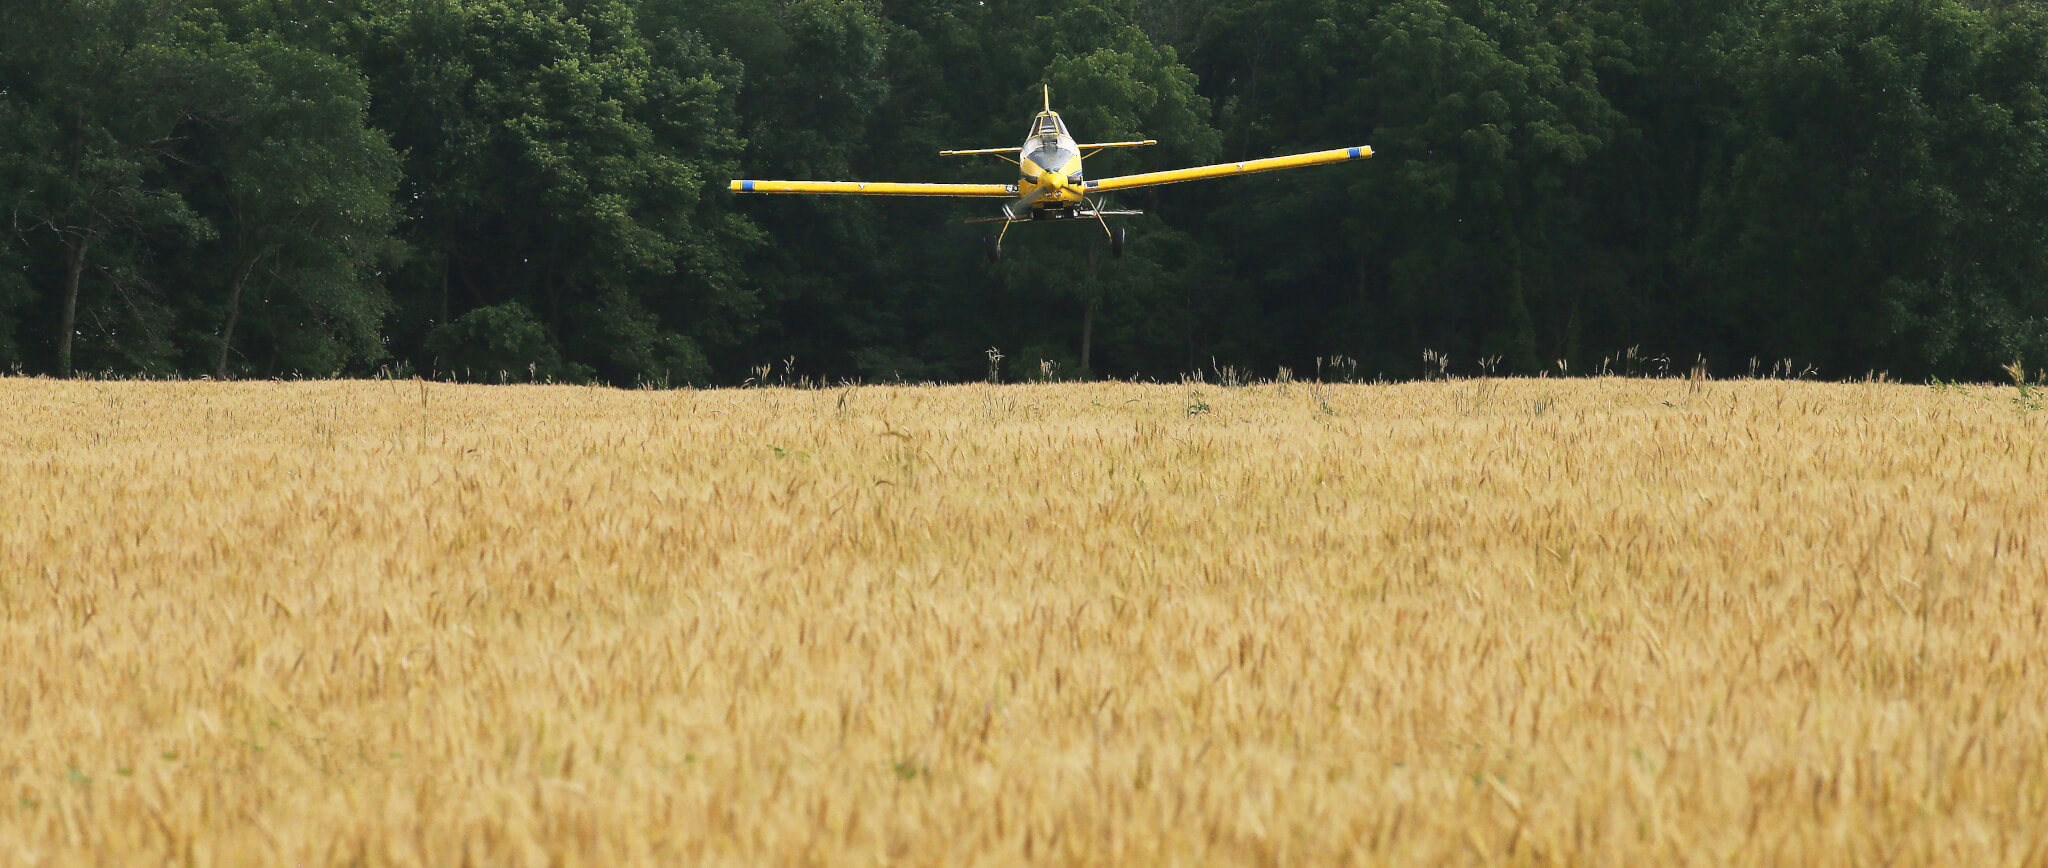 Pilot flies well below the treeline, preparing to drop a load of soybeans on Kyle Blaydes’ wheat field in Montgomery County.